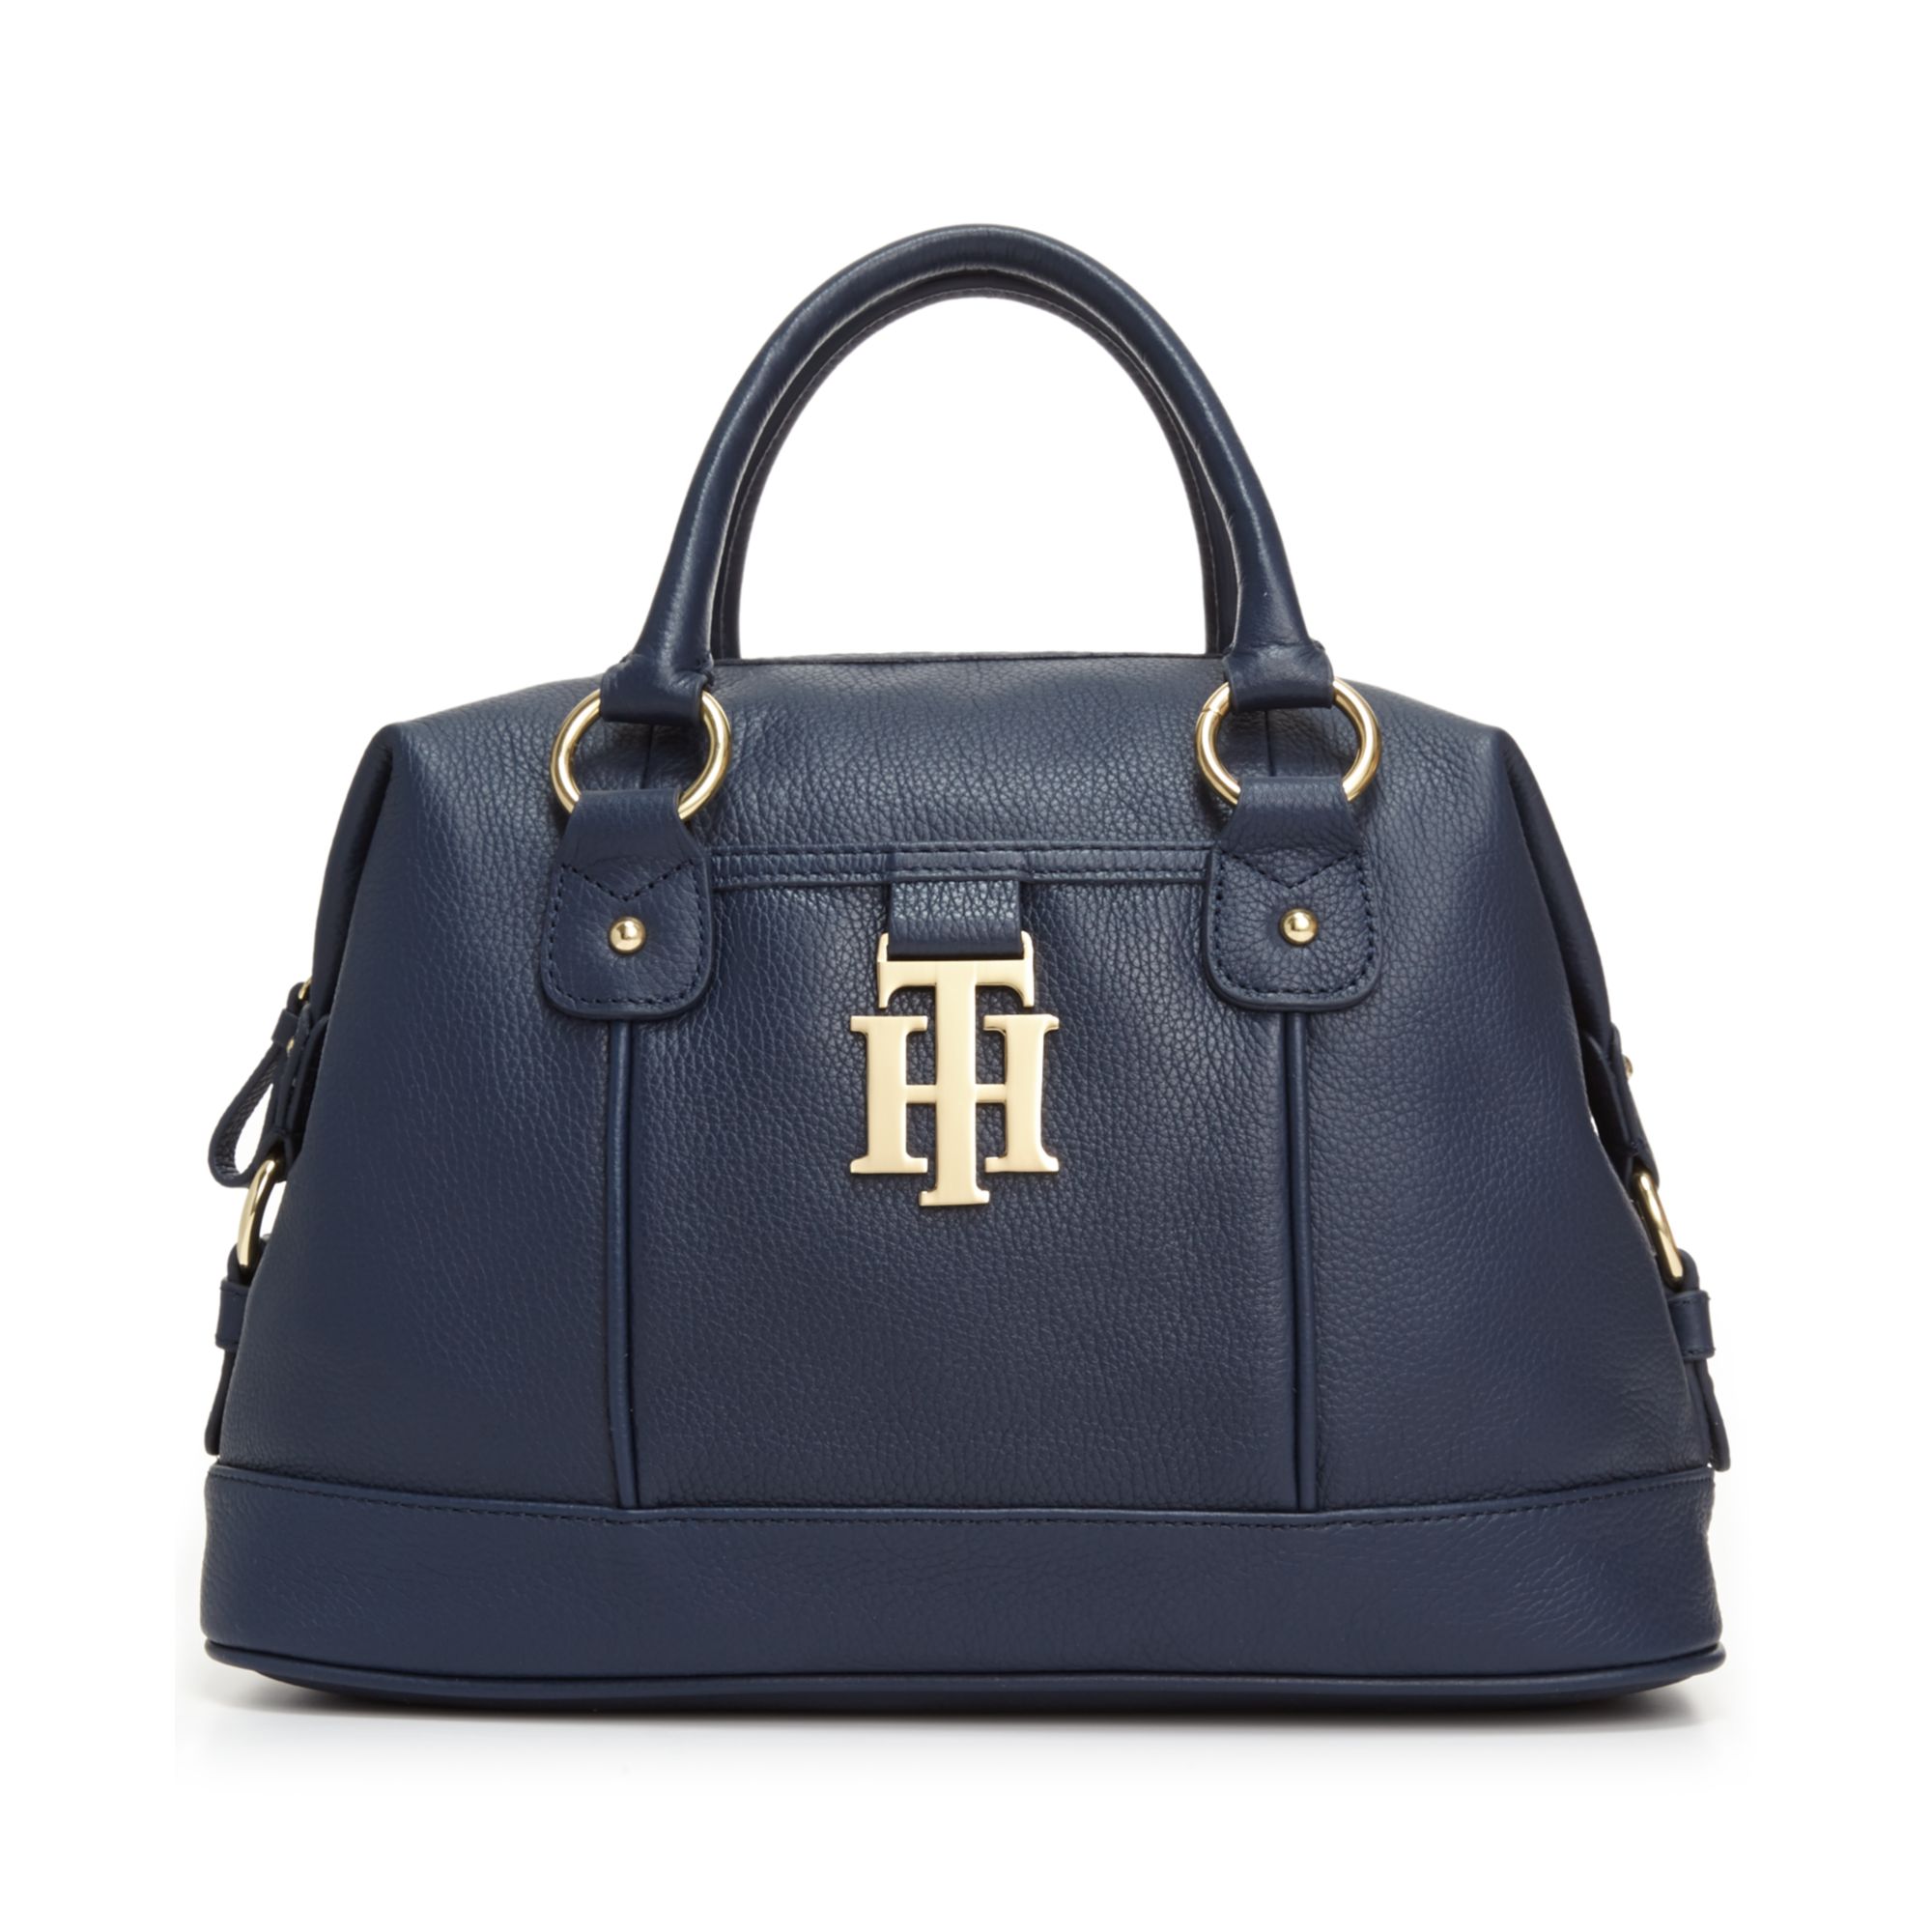 Tommy Hilfiger Navy Bag Italy, SAVE 32% - aveclumiere.com